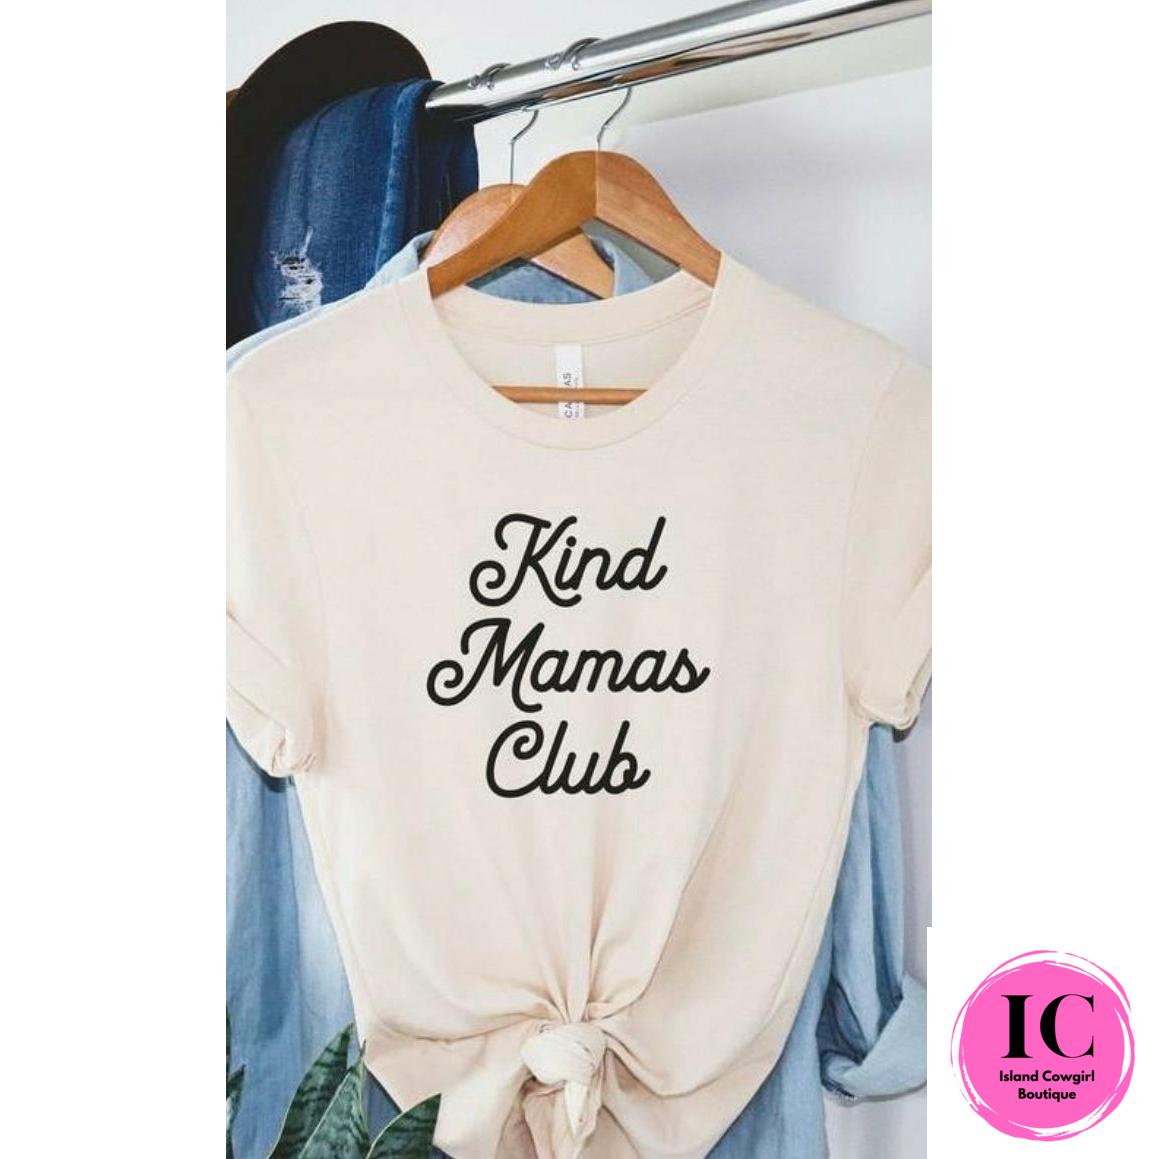 Kind Mamas Club Graphic Tee - Island Cowgirl Boutique